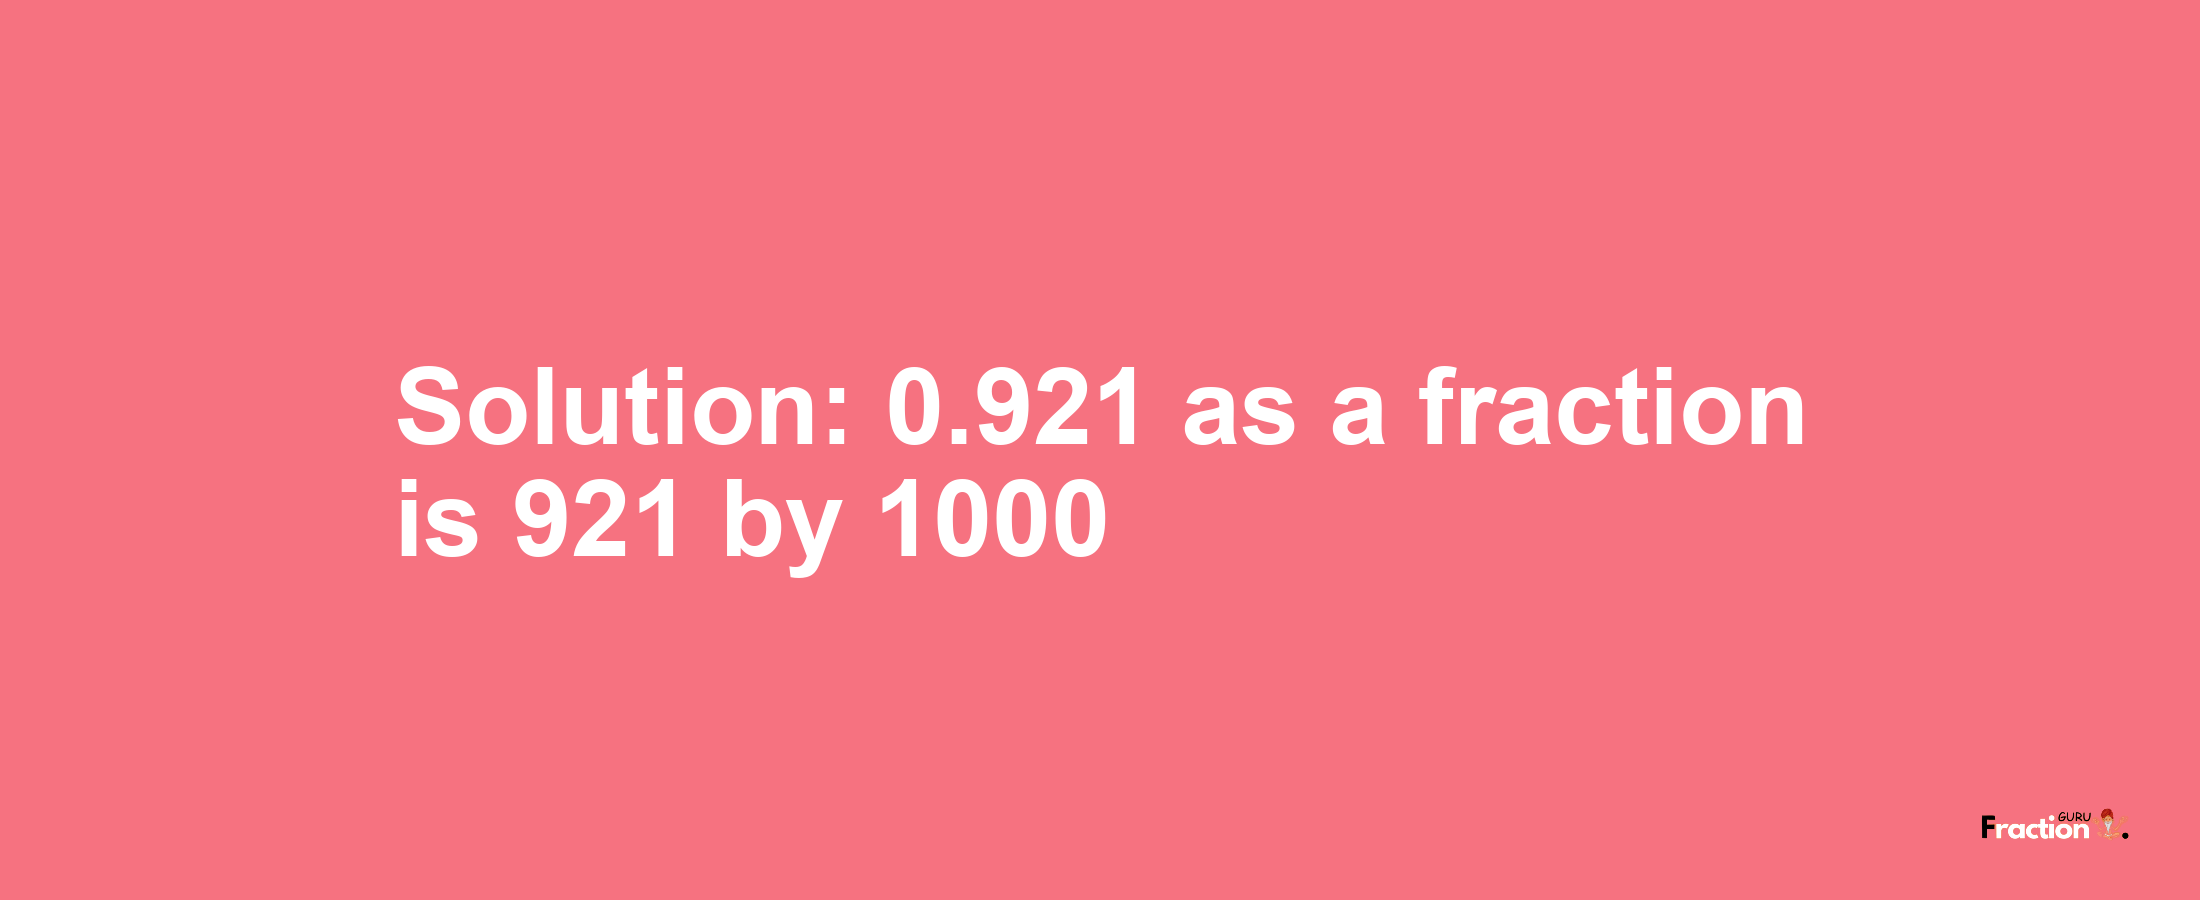 Solution:0.921 as a fraction is 921/1000